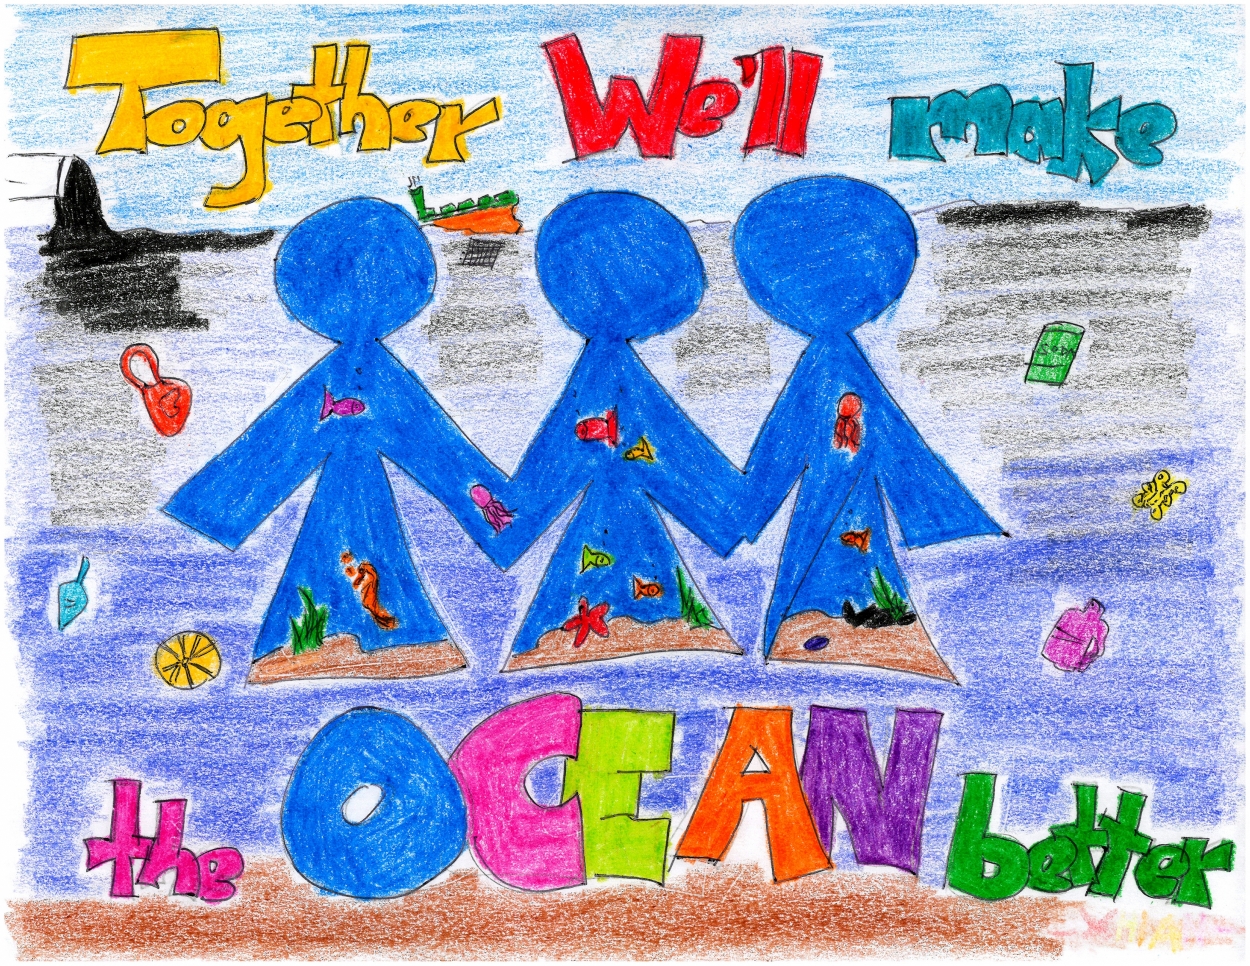 Drawing of three people holding hands by the ocean with the text "Together We'll Make the OCEAN better"